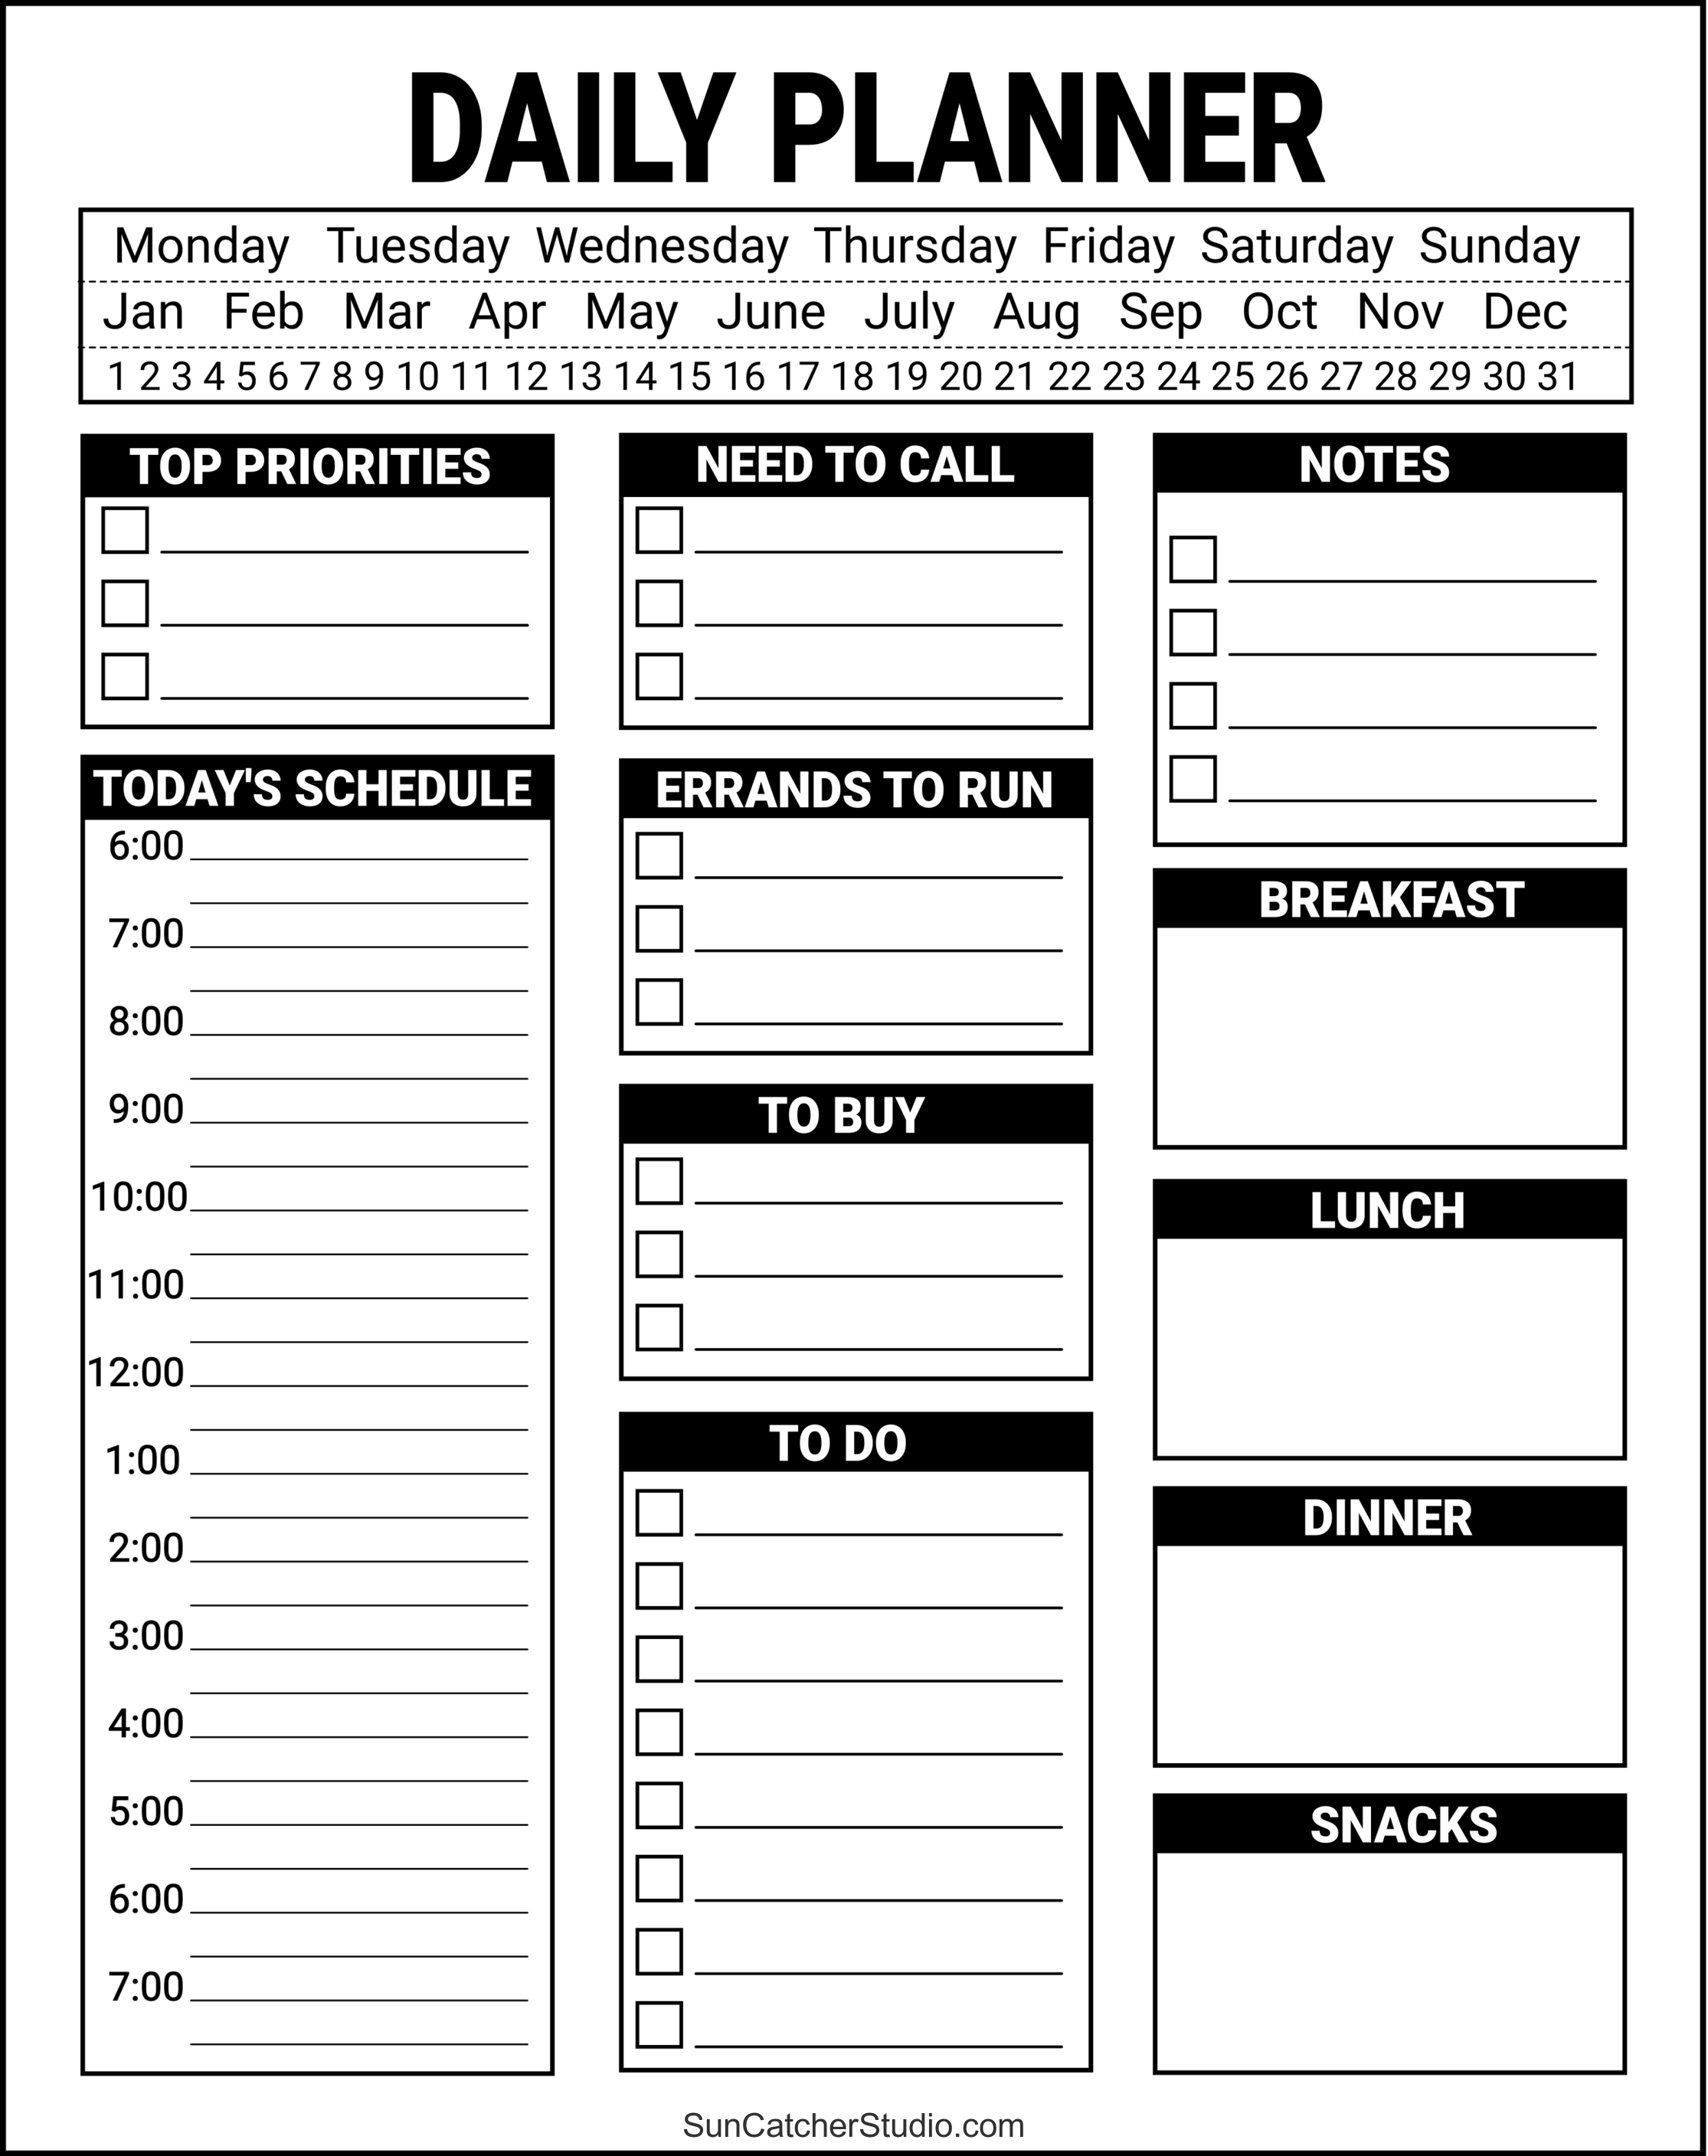 free-printable-daily-planner-templates-pdf-format-diy-projects